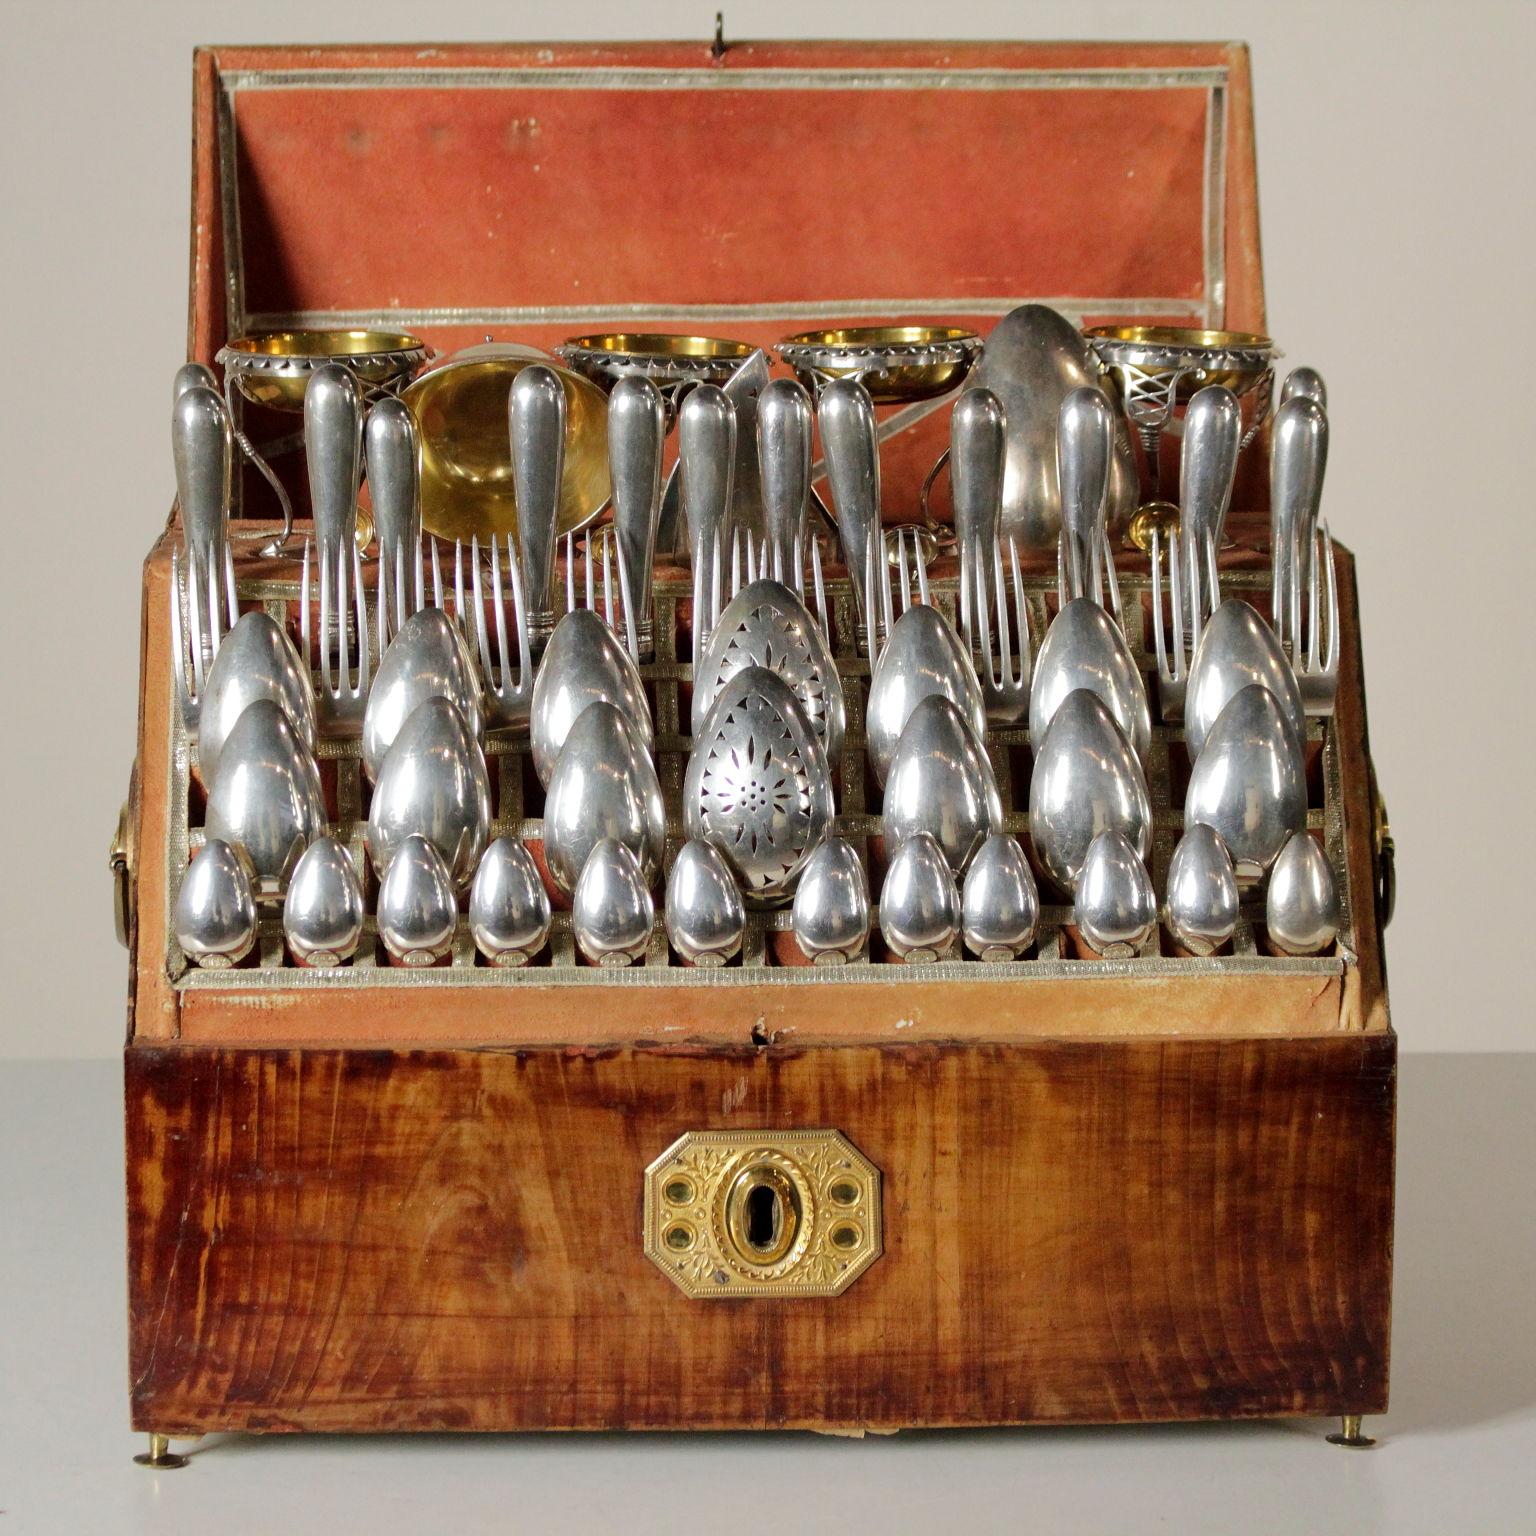 Cherry veneer travel box with brass feet, embossed and gilded metal handles and key hole with neoclassical decorations; the box is covered in red parchment inside and embellished with silver thread trimmings.
The twelve person cutlery set consists